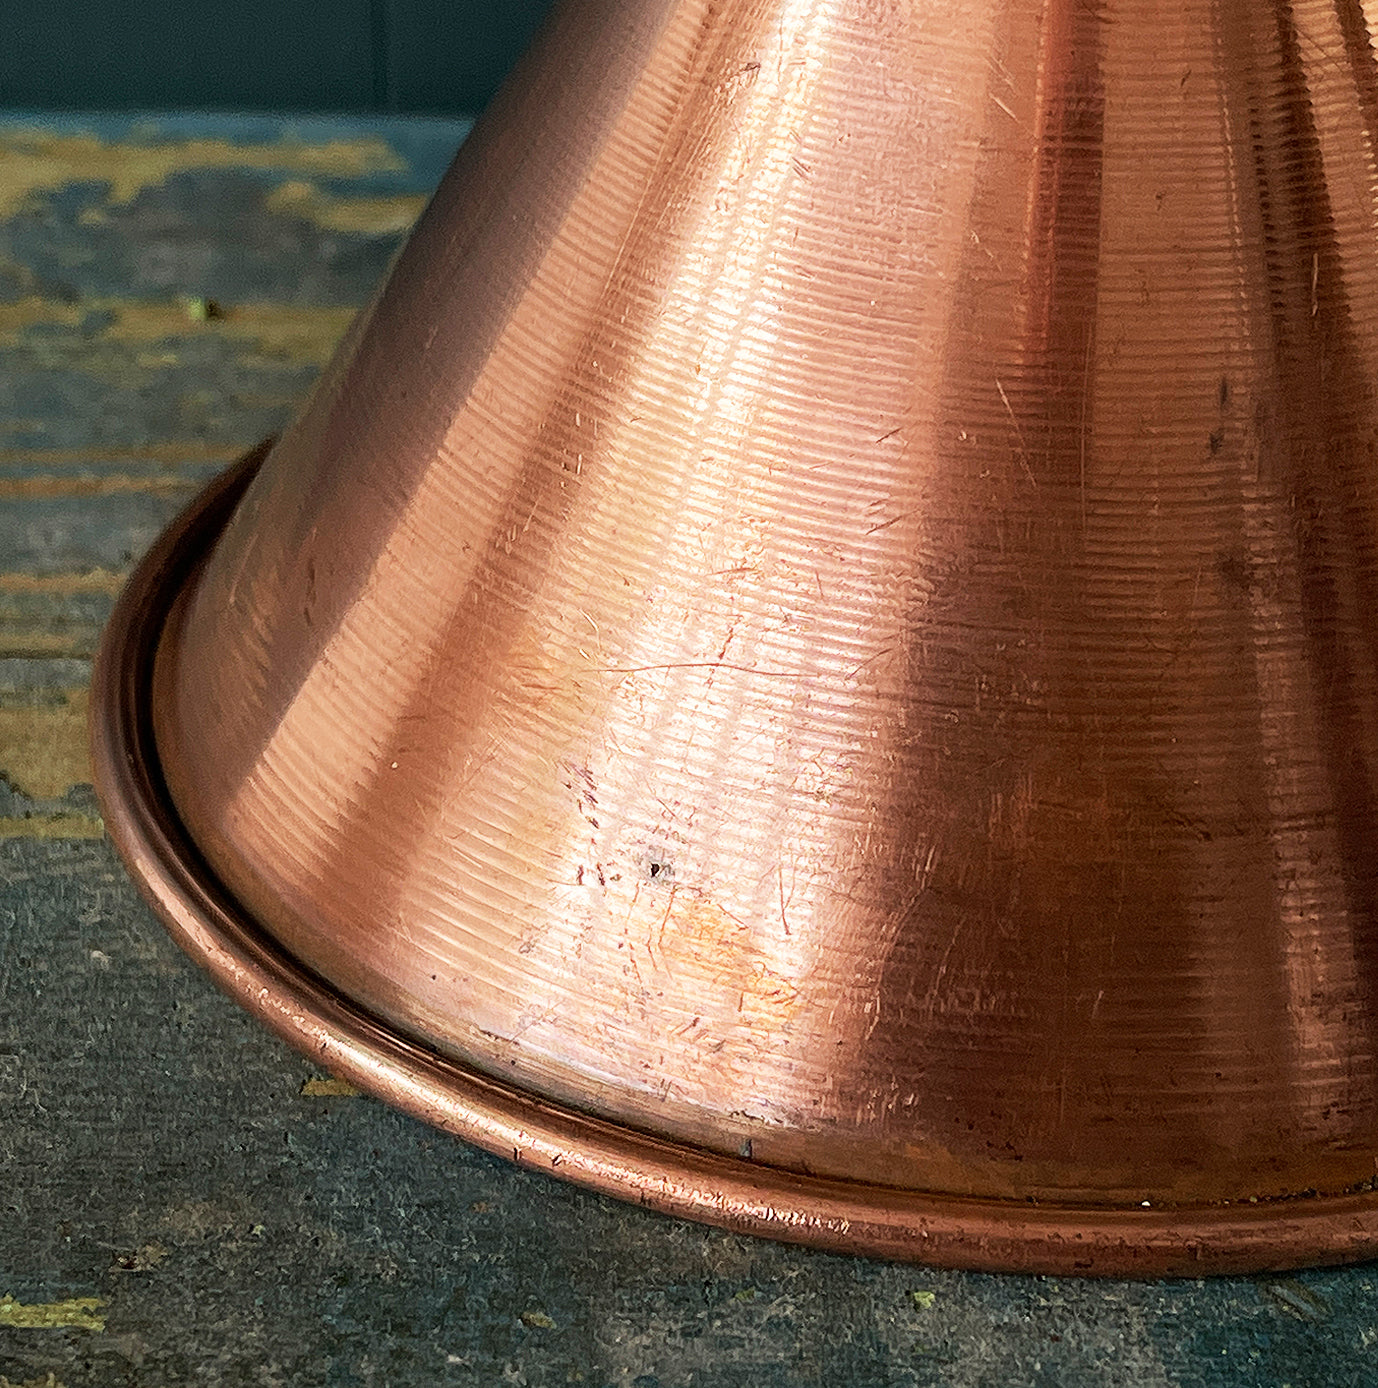 Quality Vintage Copper Funnel. Ideal for the Kitchen - SHOP NOW - www.intovintage.co.uk